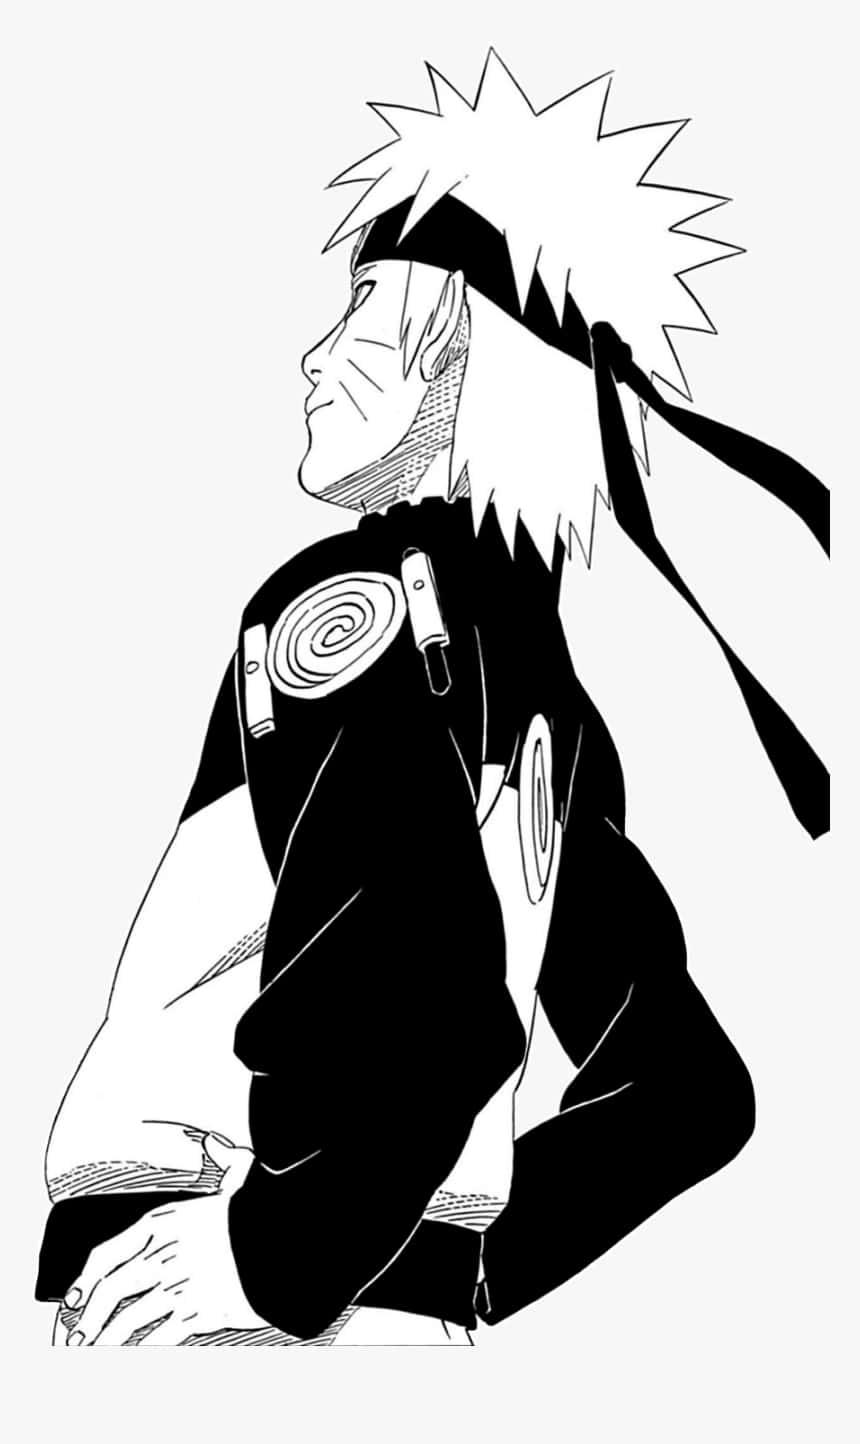 "Naruto in a powerful pose"